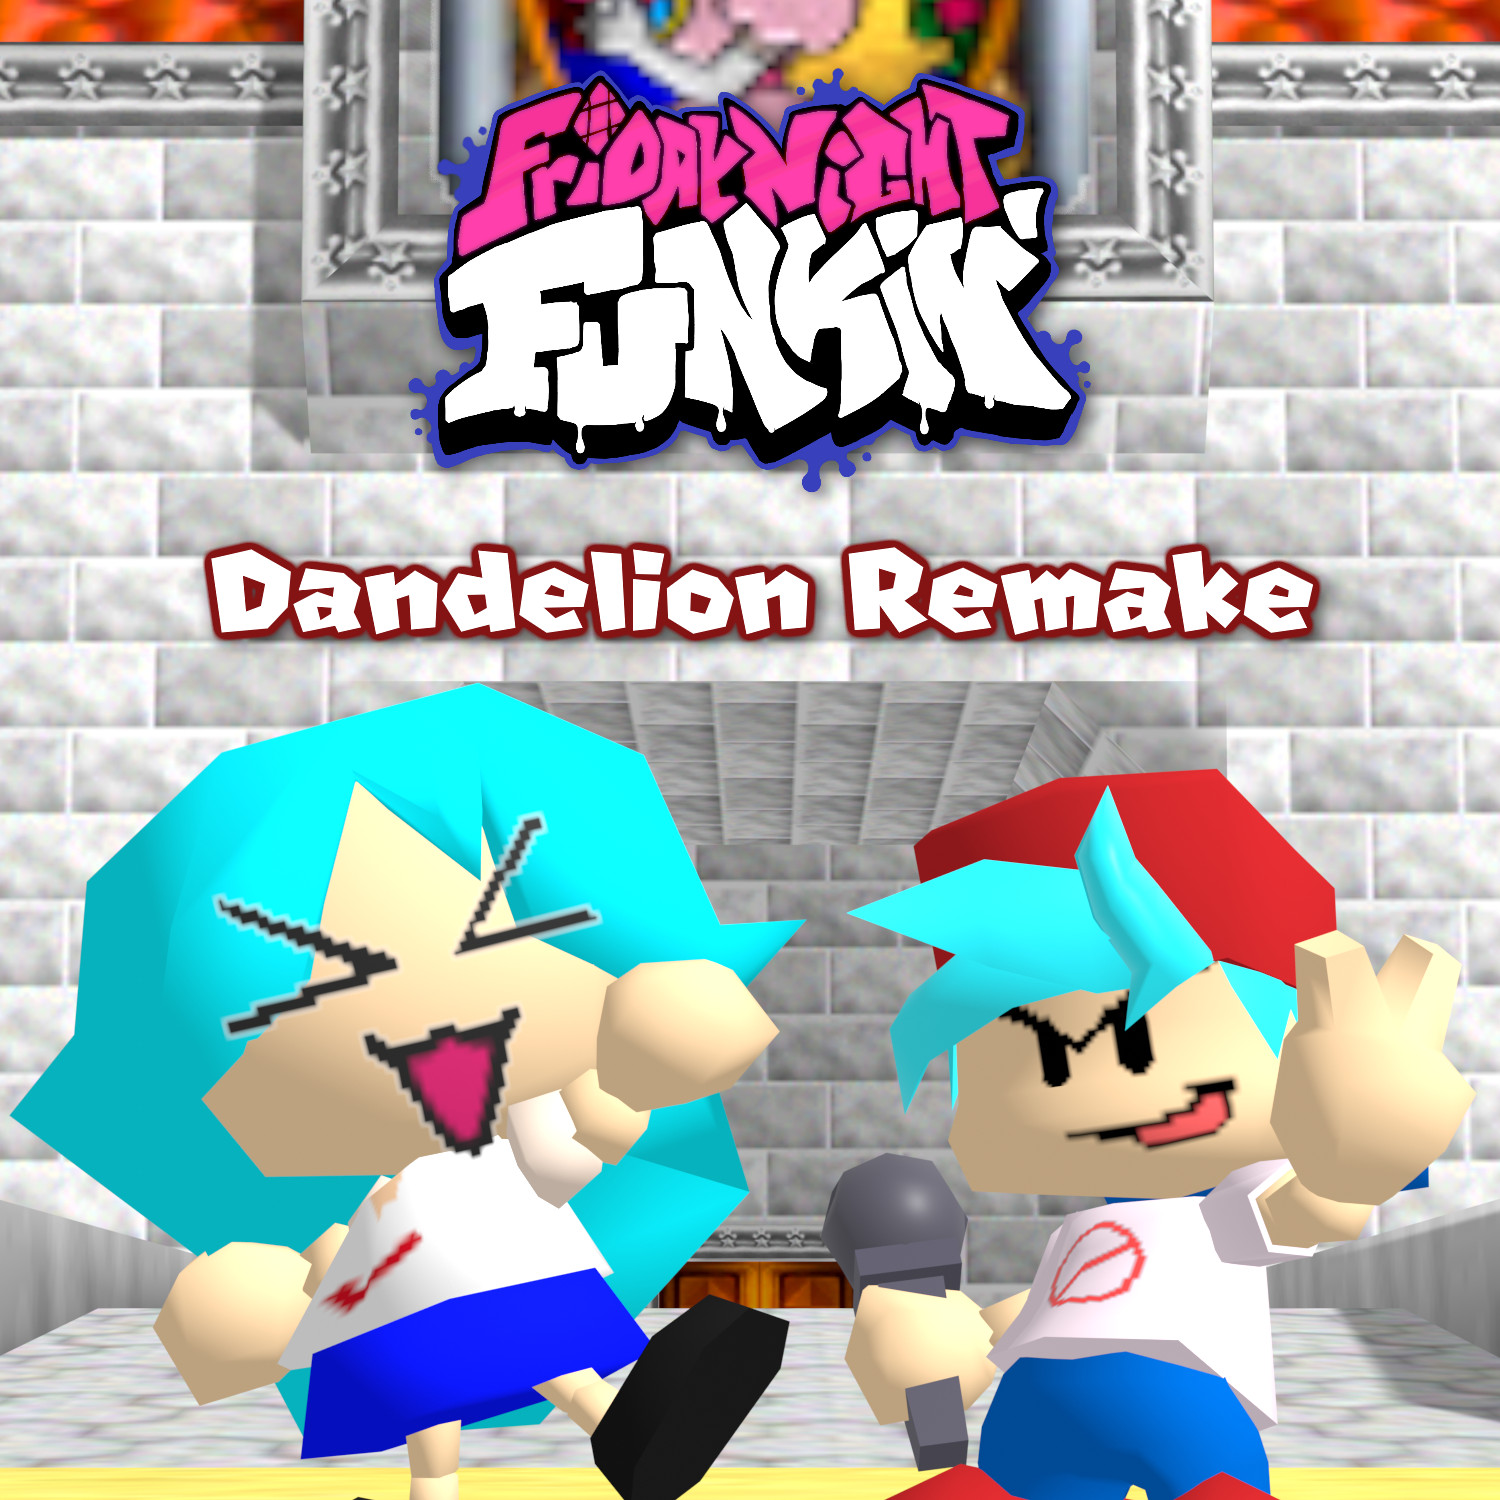 Stream Dandelion - Sunky & Sonic cover, FNF Cover by TJYoshiboy's FNF  Covers